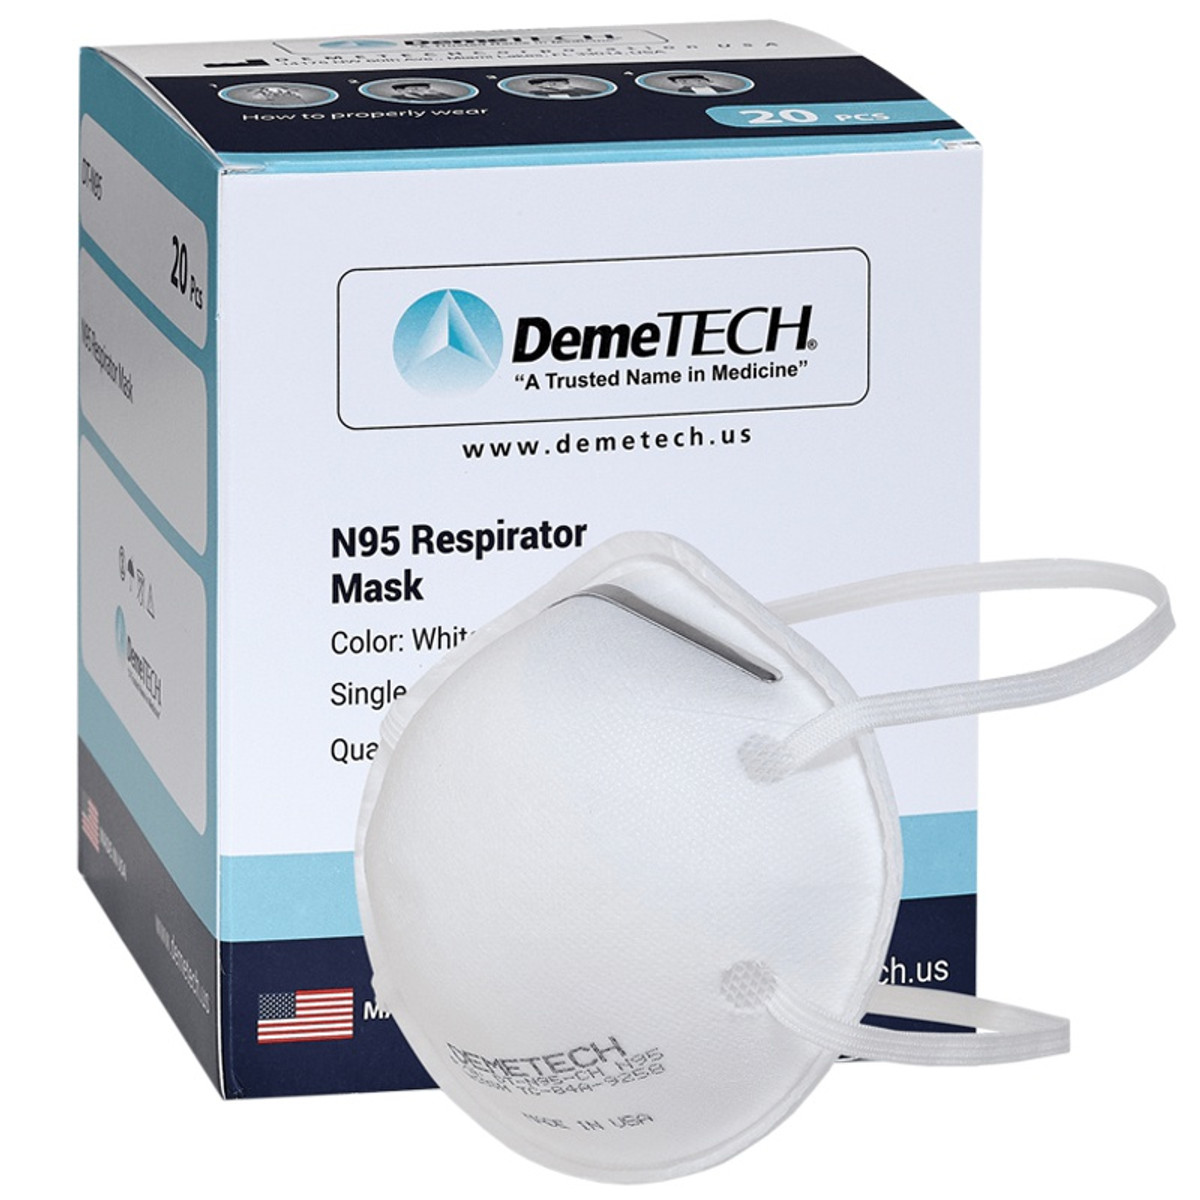 N95 Respirators - Made in the USA